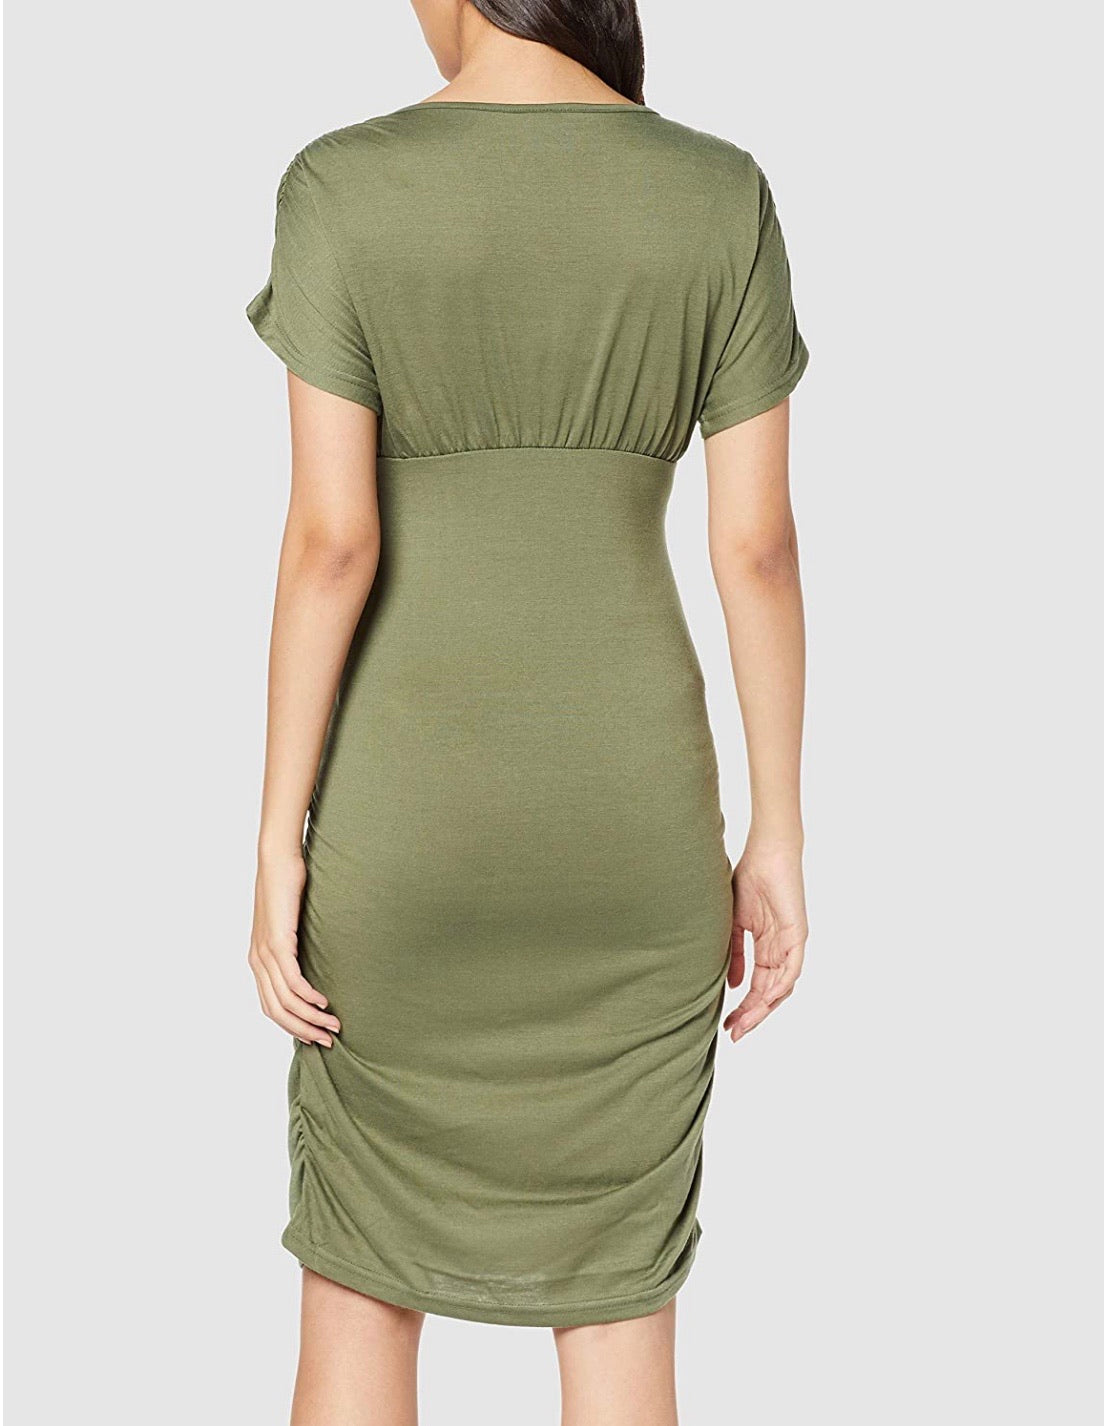 Fashionably Pregnant Mamalicious Maternity Casual Green Four leaf clover pilar khaki Evening Dress Special occassion, baby shower, wedding guest. U.K maternity and nursing boutique. Free UK delivery